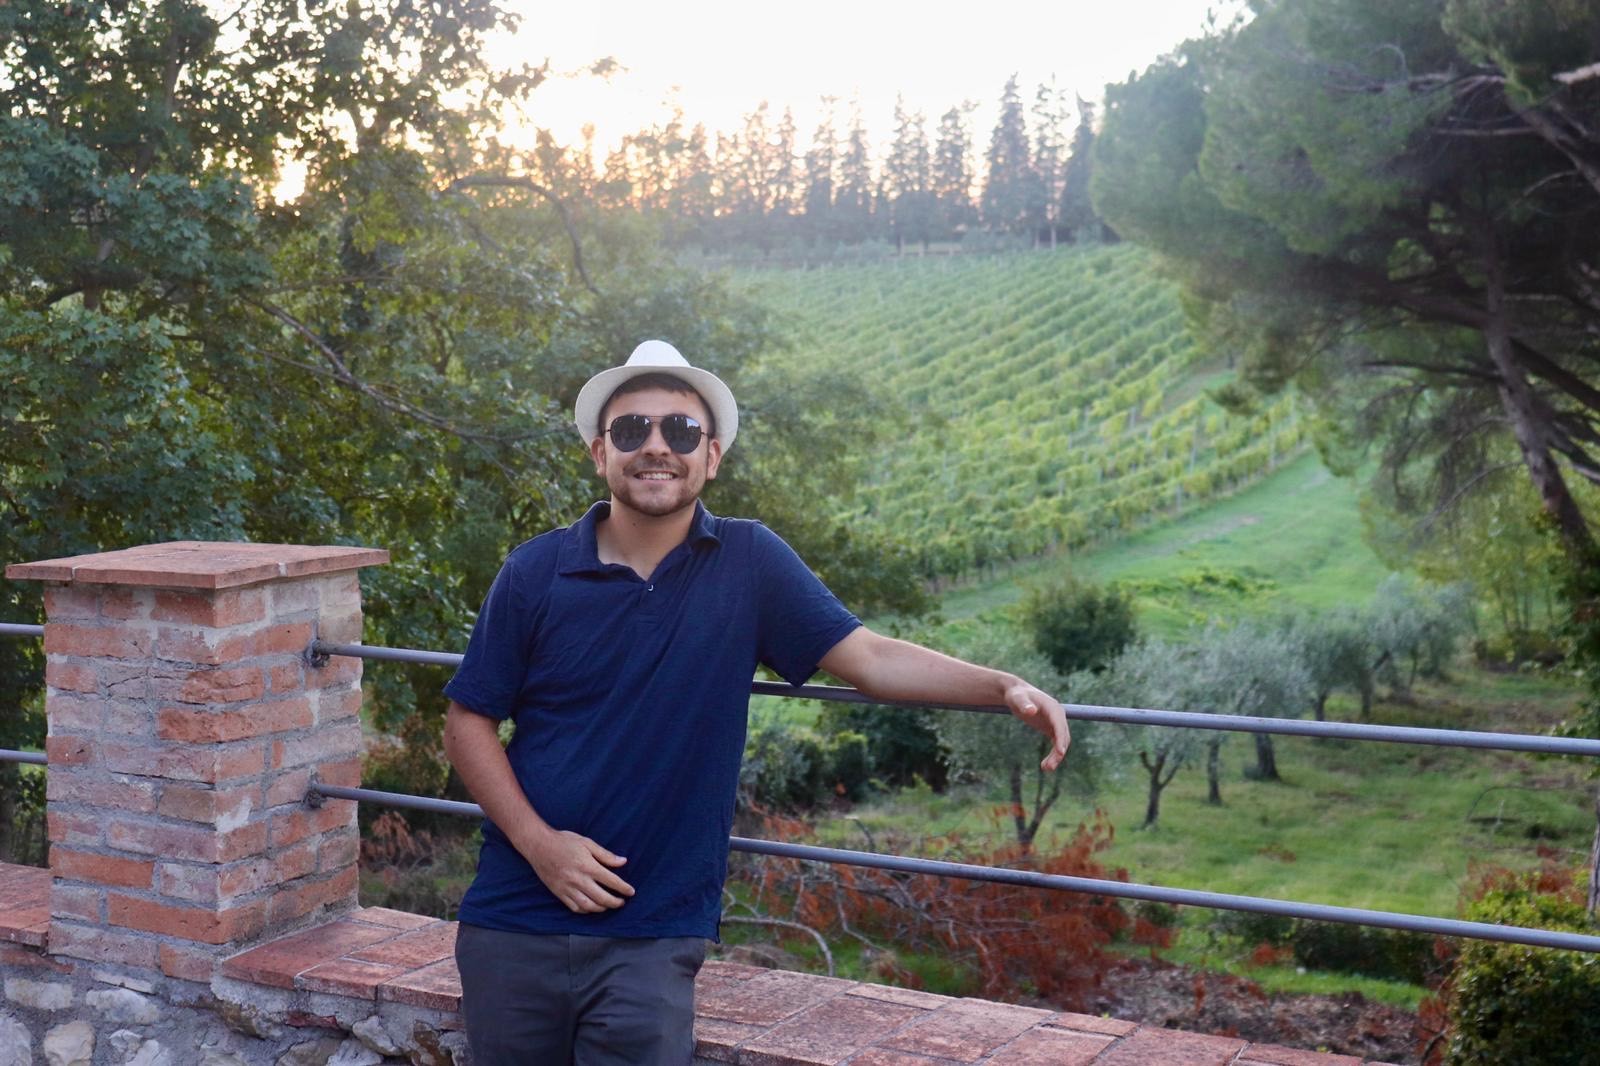 A young person posing in front of rows of grapes growing at a vineyard